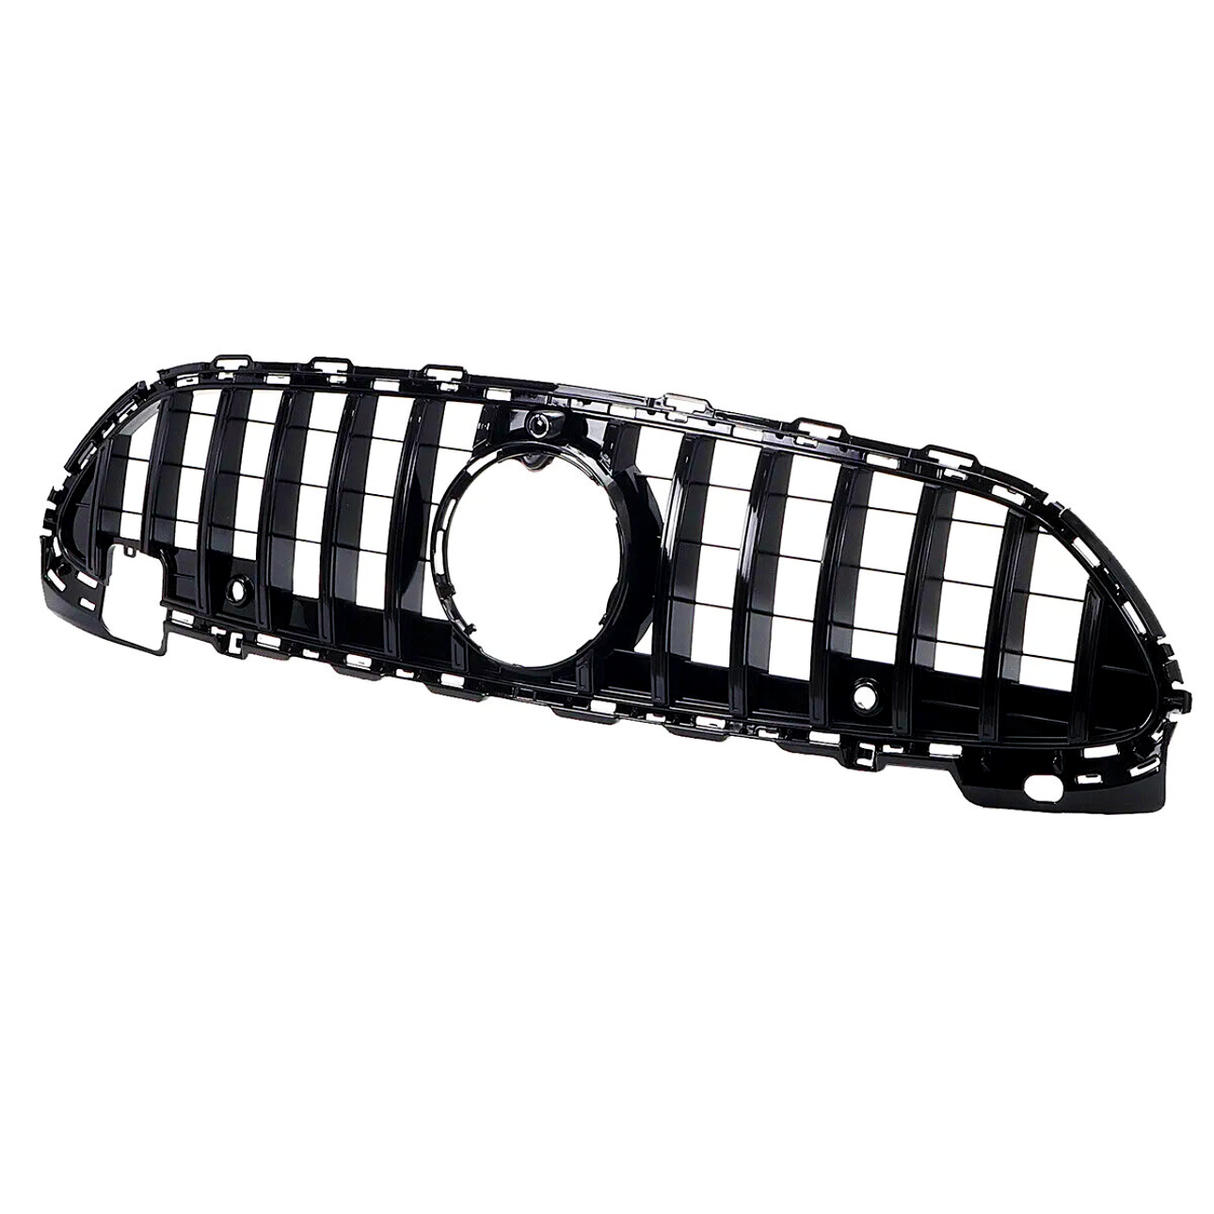 Kidney Grille Black Chrome fits on Mercedes C-Class S206 W206 up 2021 to  Sport Panamericana GT